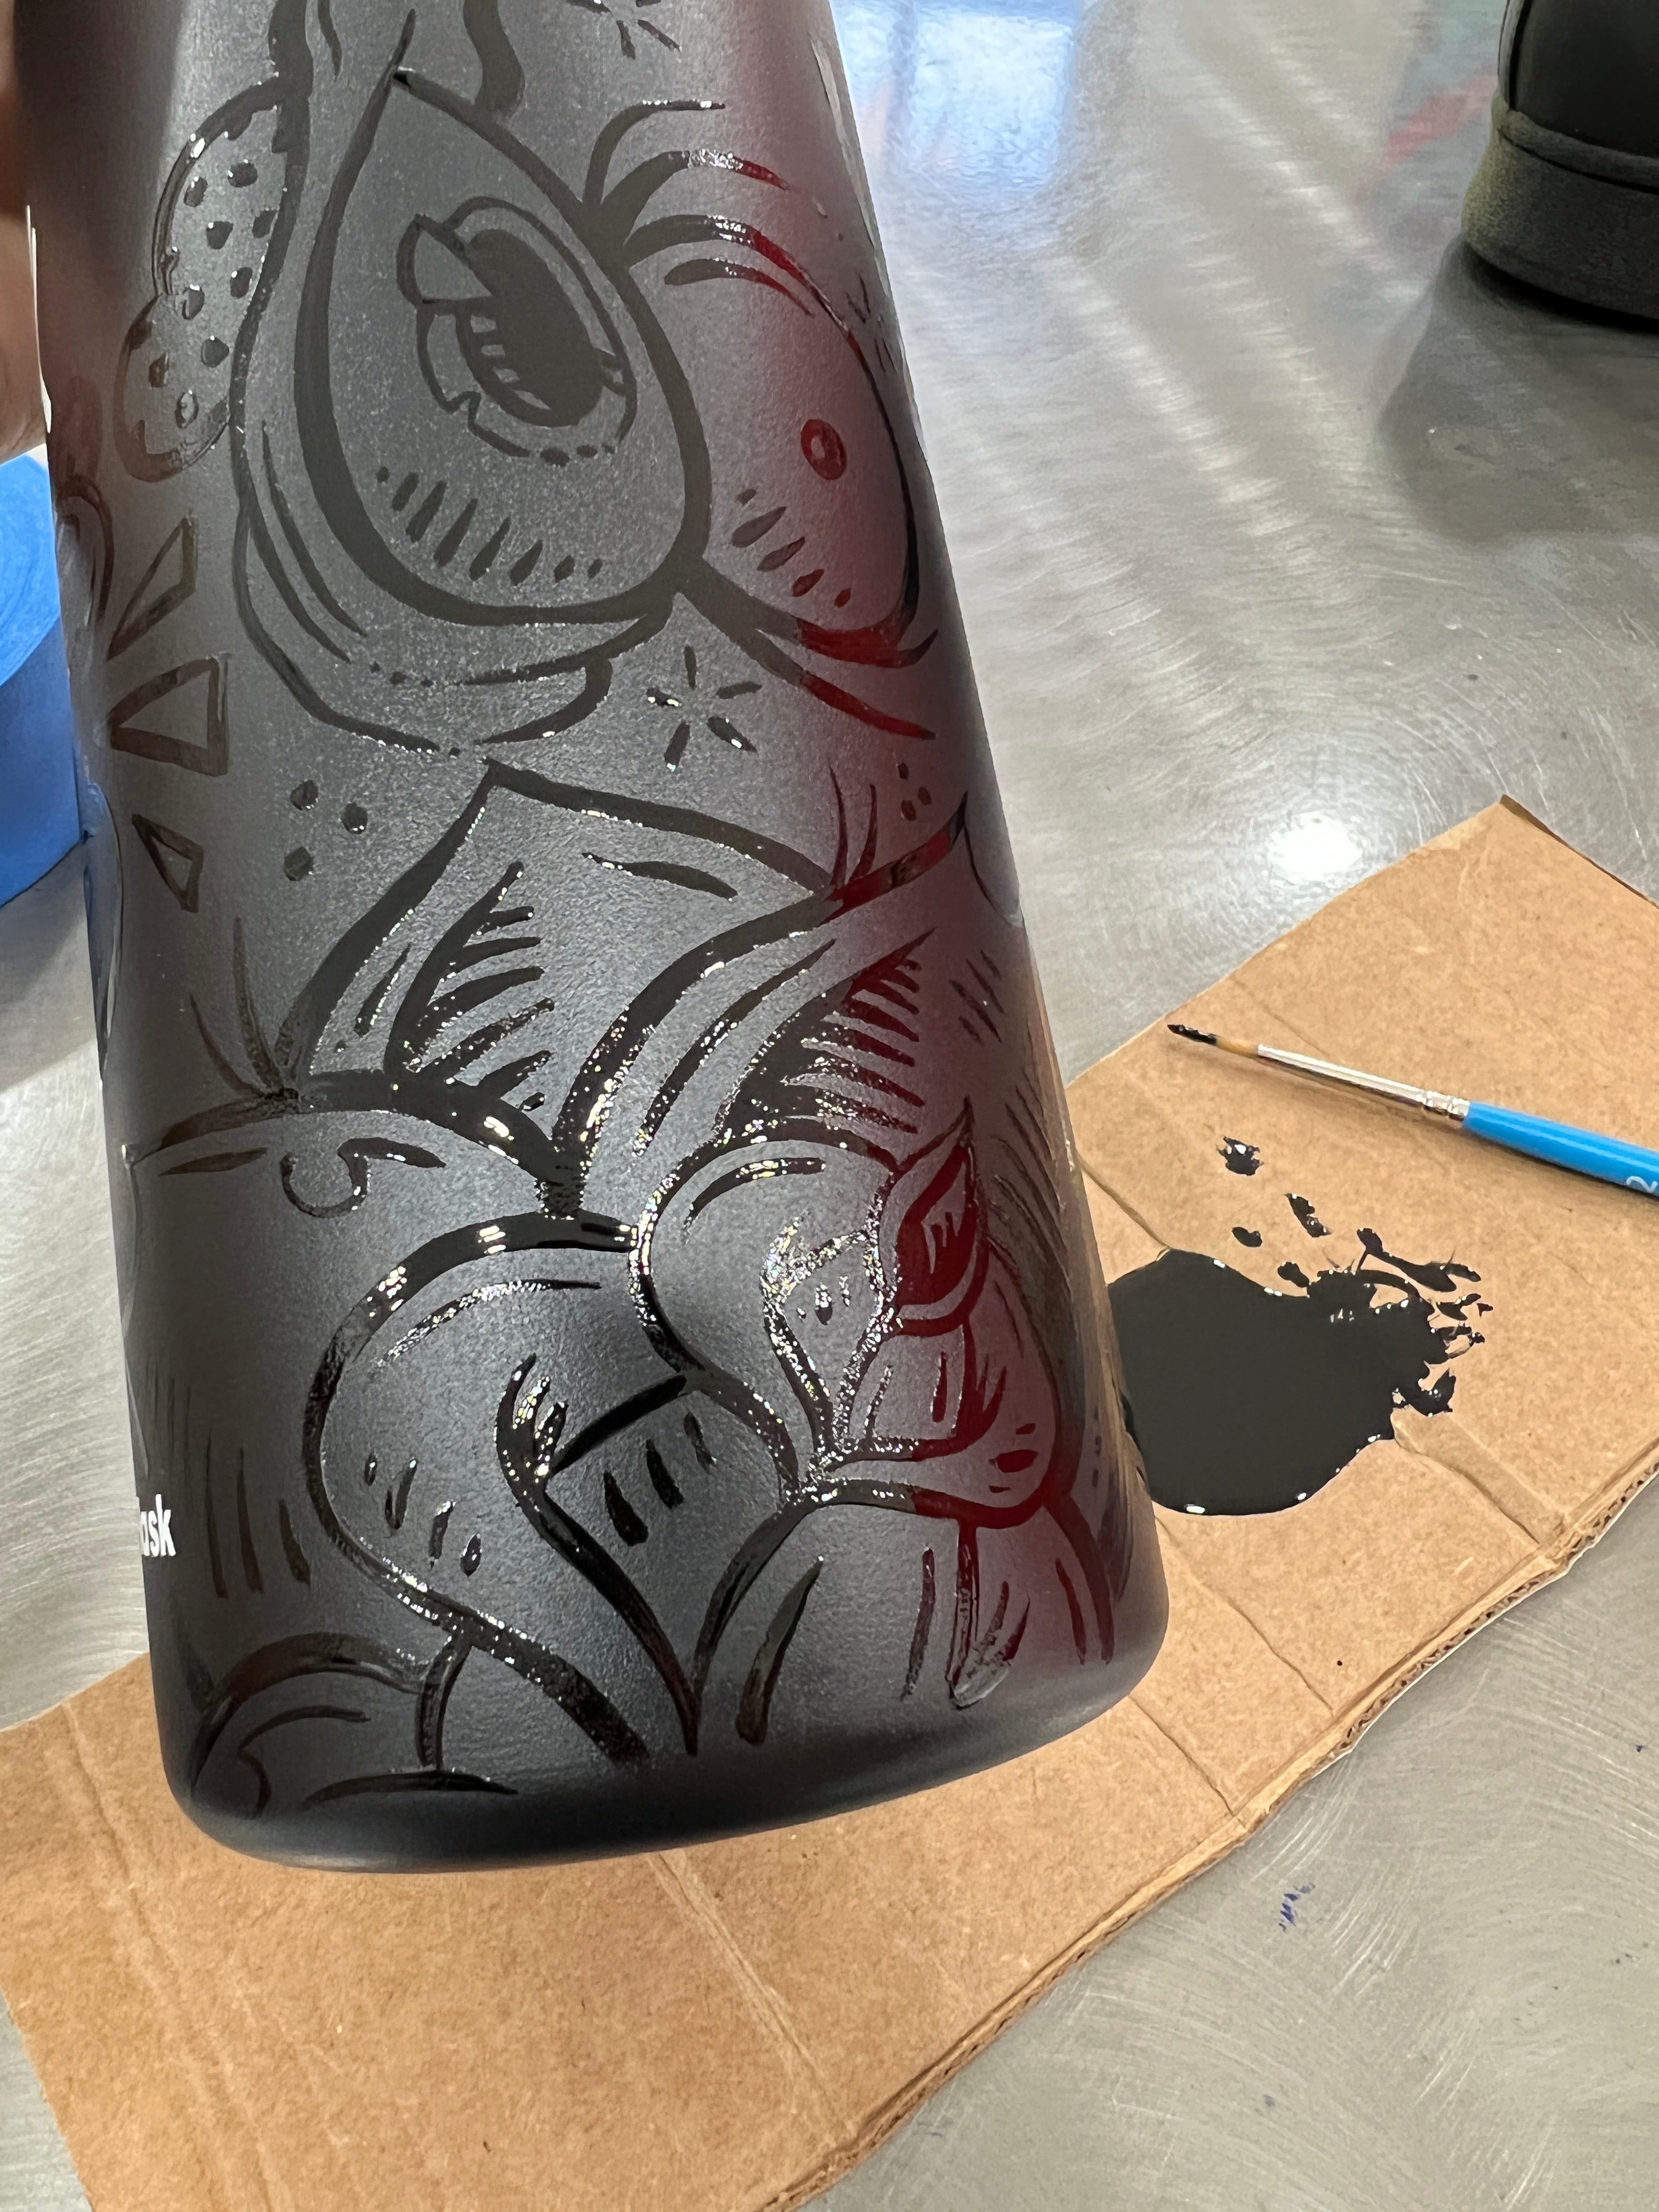 Custom Hand Painted Hydro Flask - 32oz Wide Mouth Stealth edition